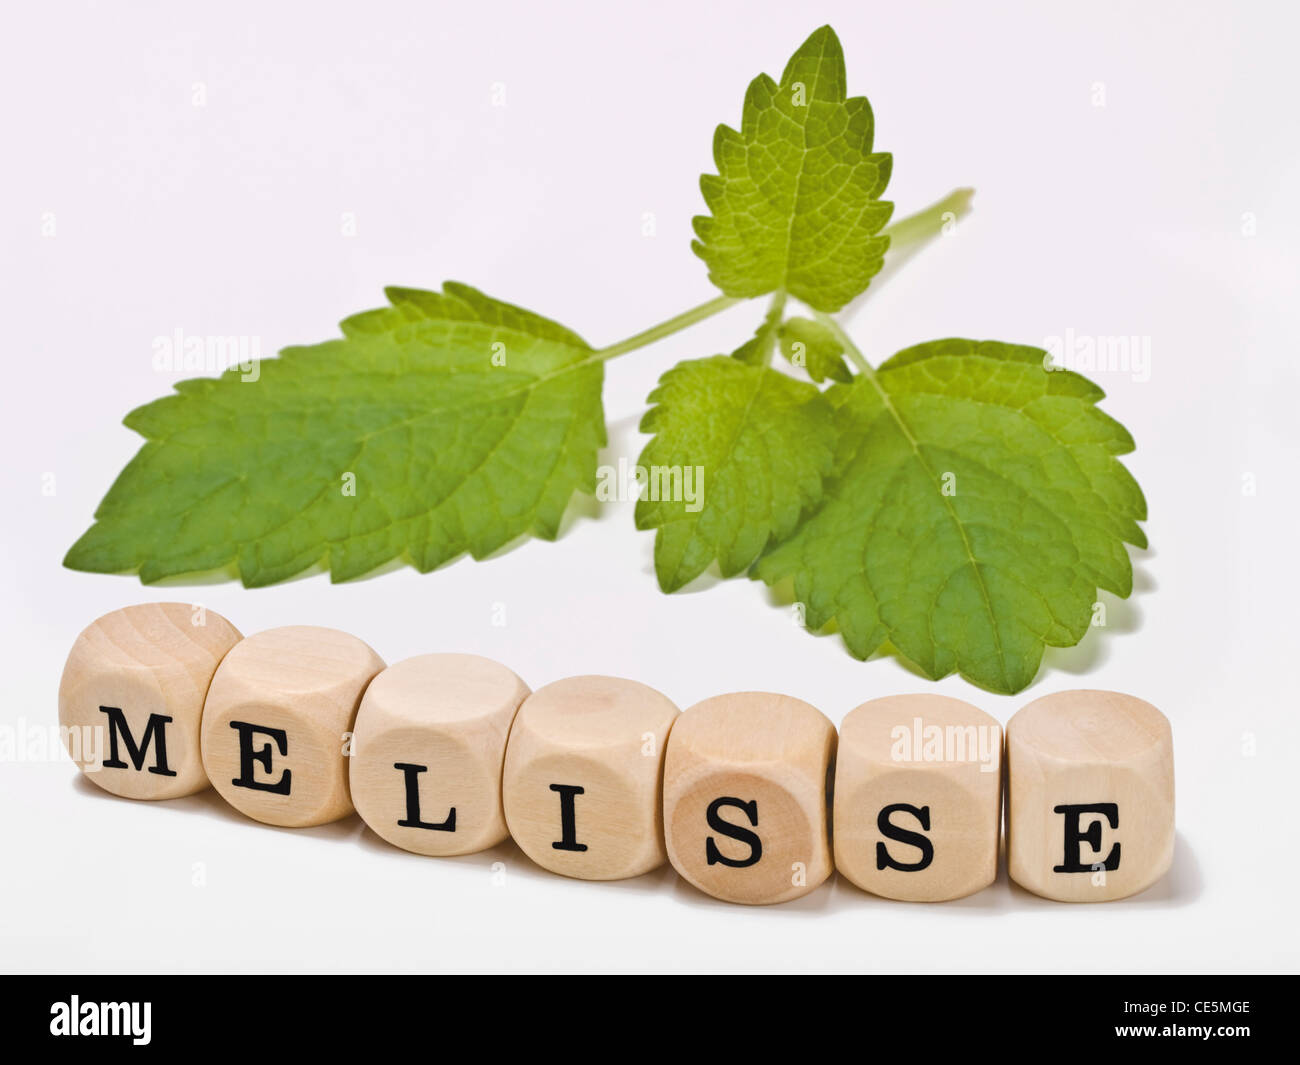 Detail photo of Lemon balm leaves alongside are cubes which form the word 'Lemon balm' in German Stock Photo